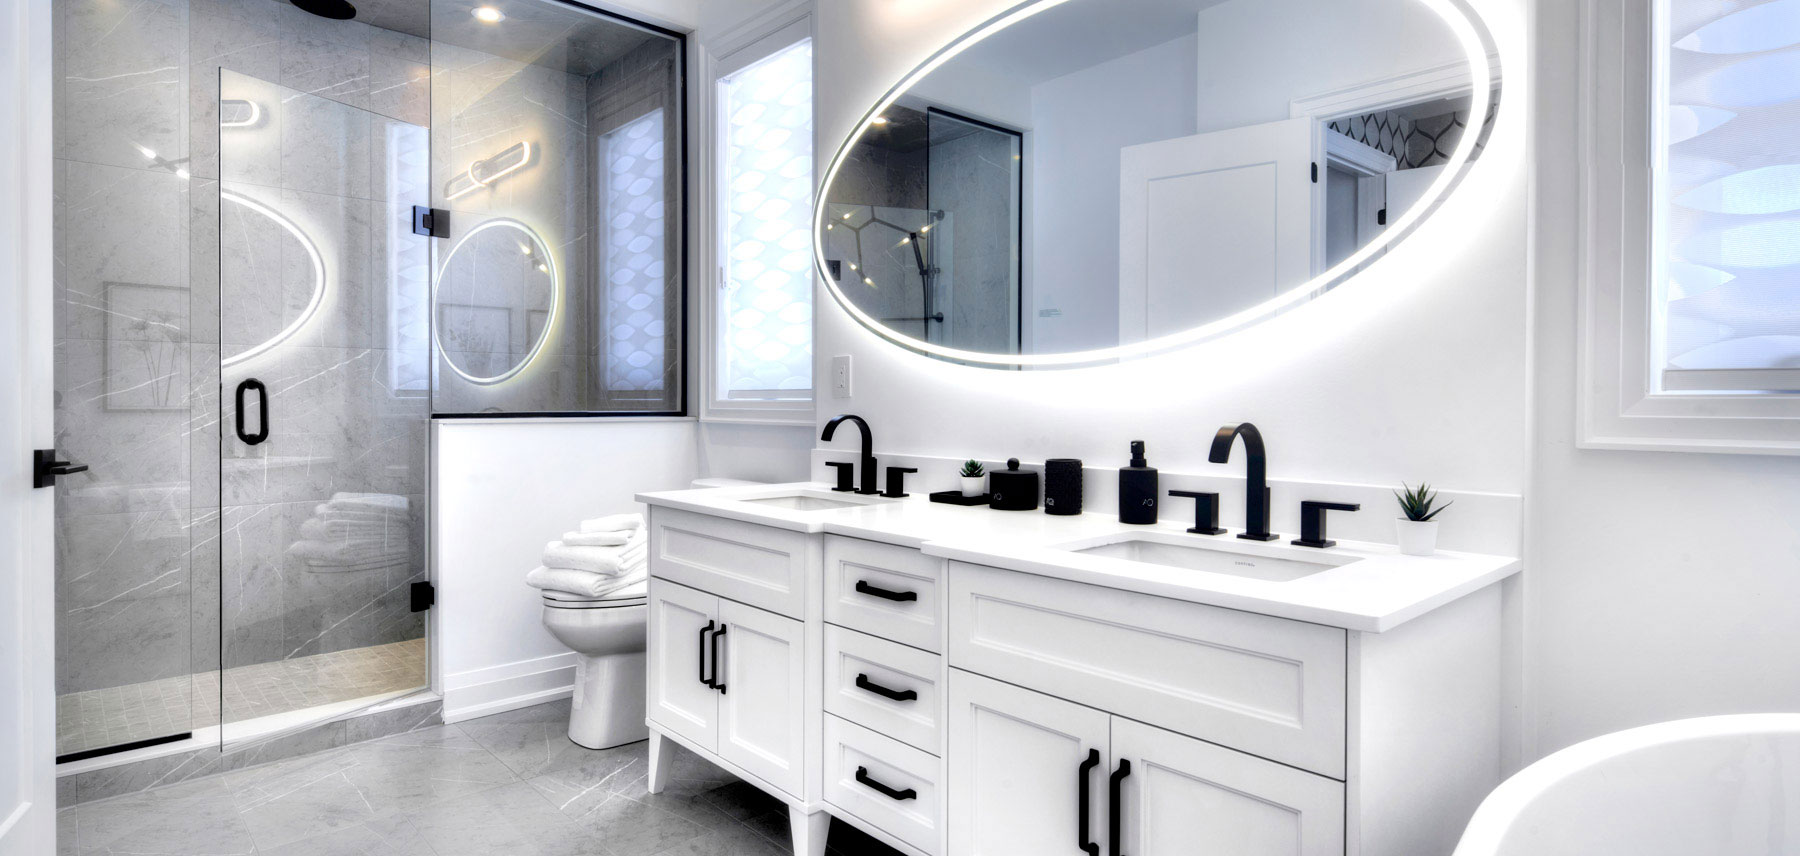 Images of high-end interiors and fixtures, such as flooring, faucet, ensuite, etc